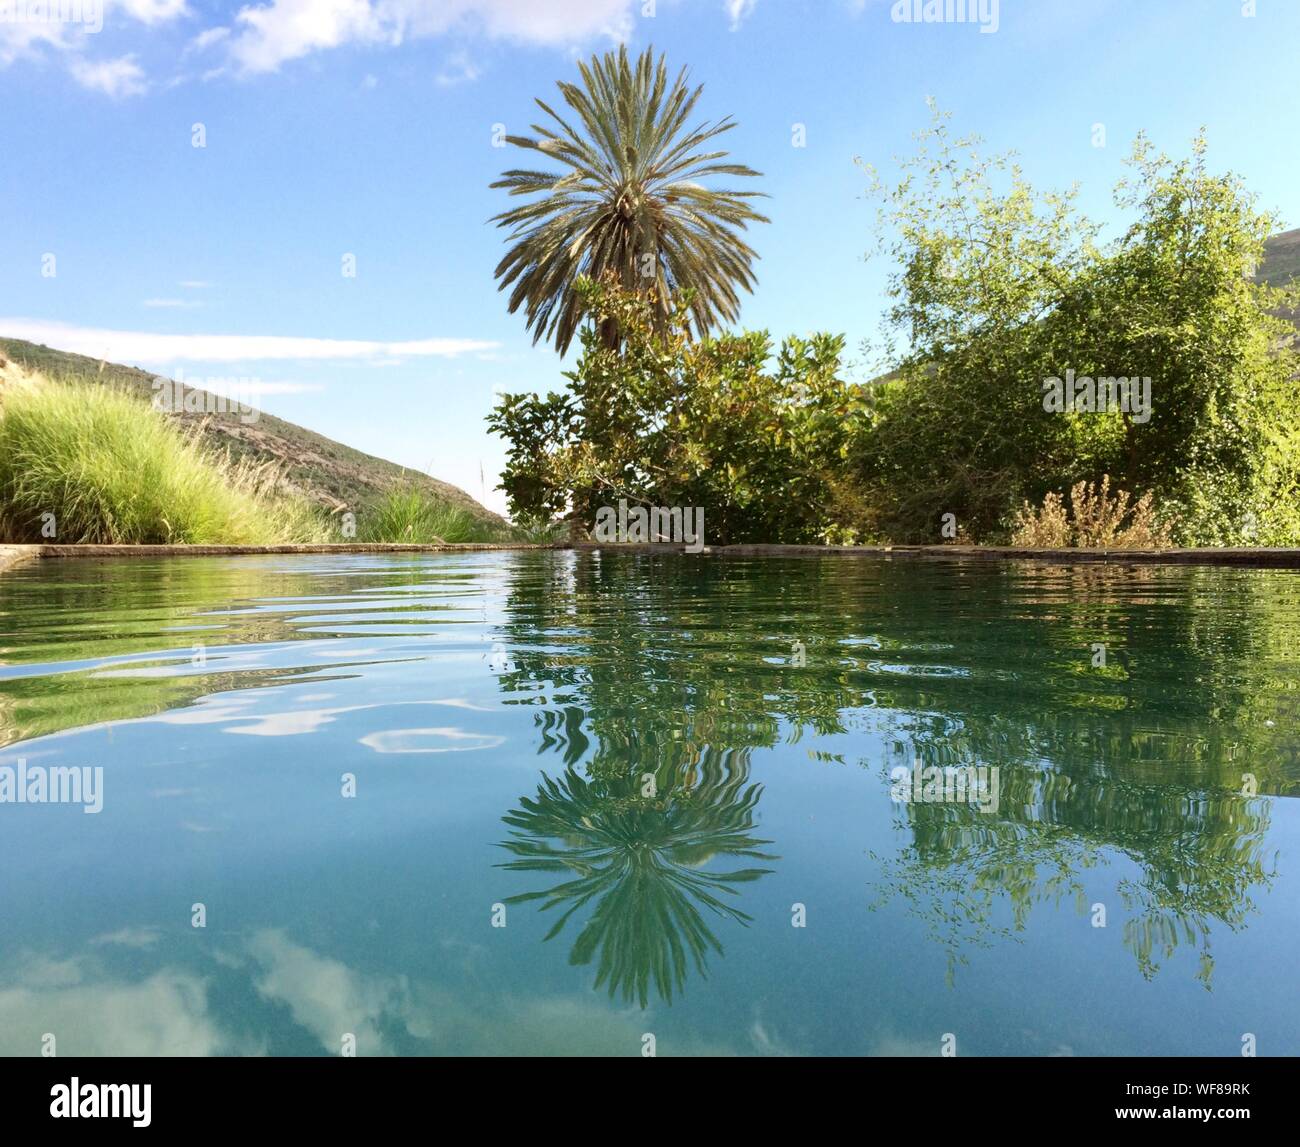 Tropical Vegetation Reflecting In Pond Stock Photo